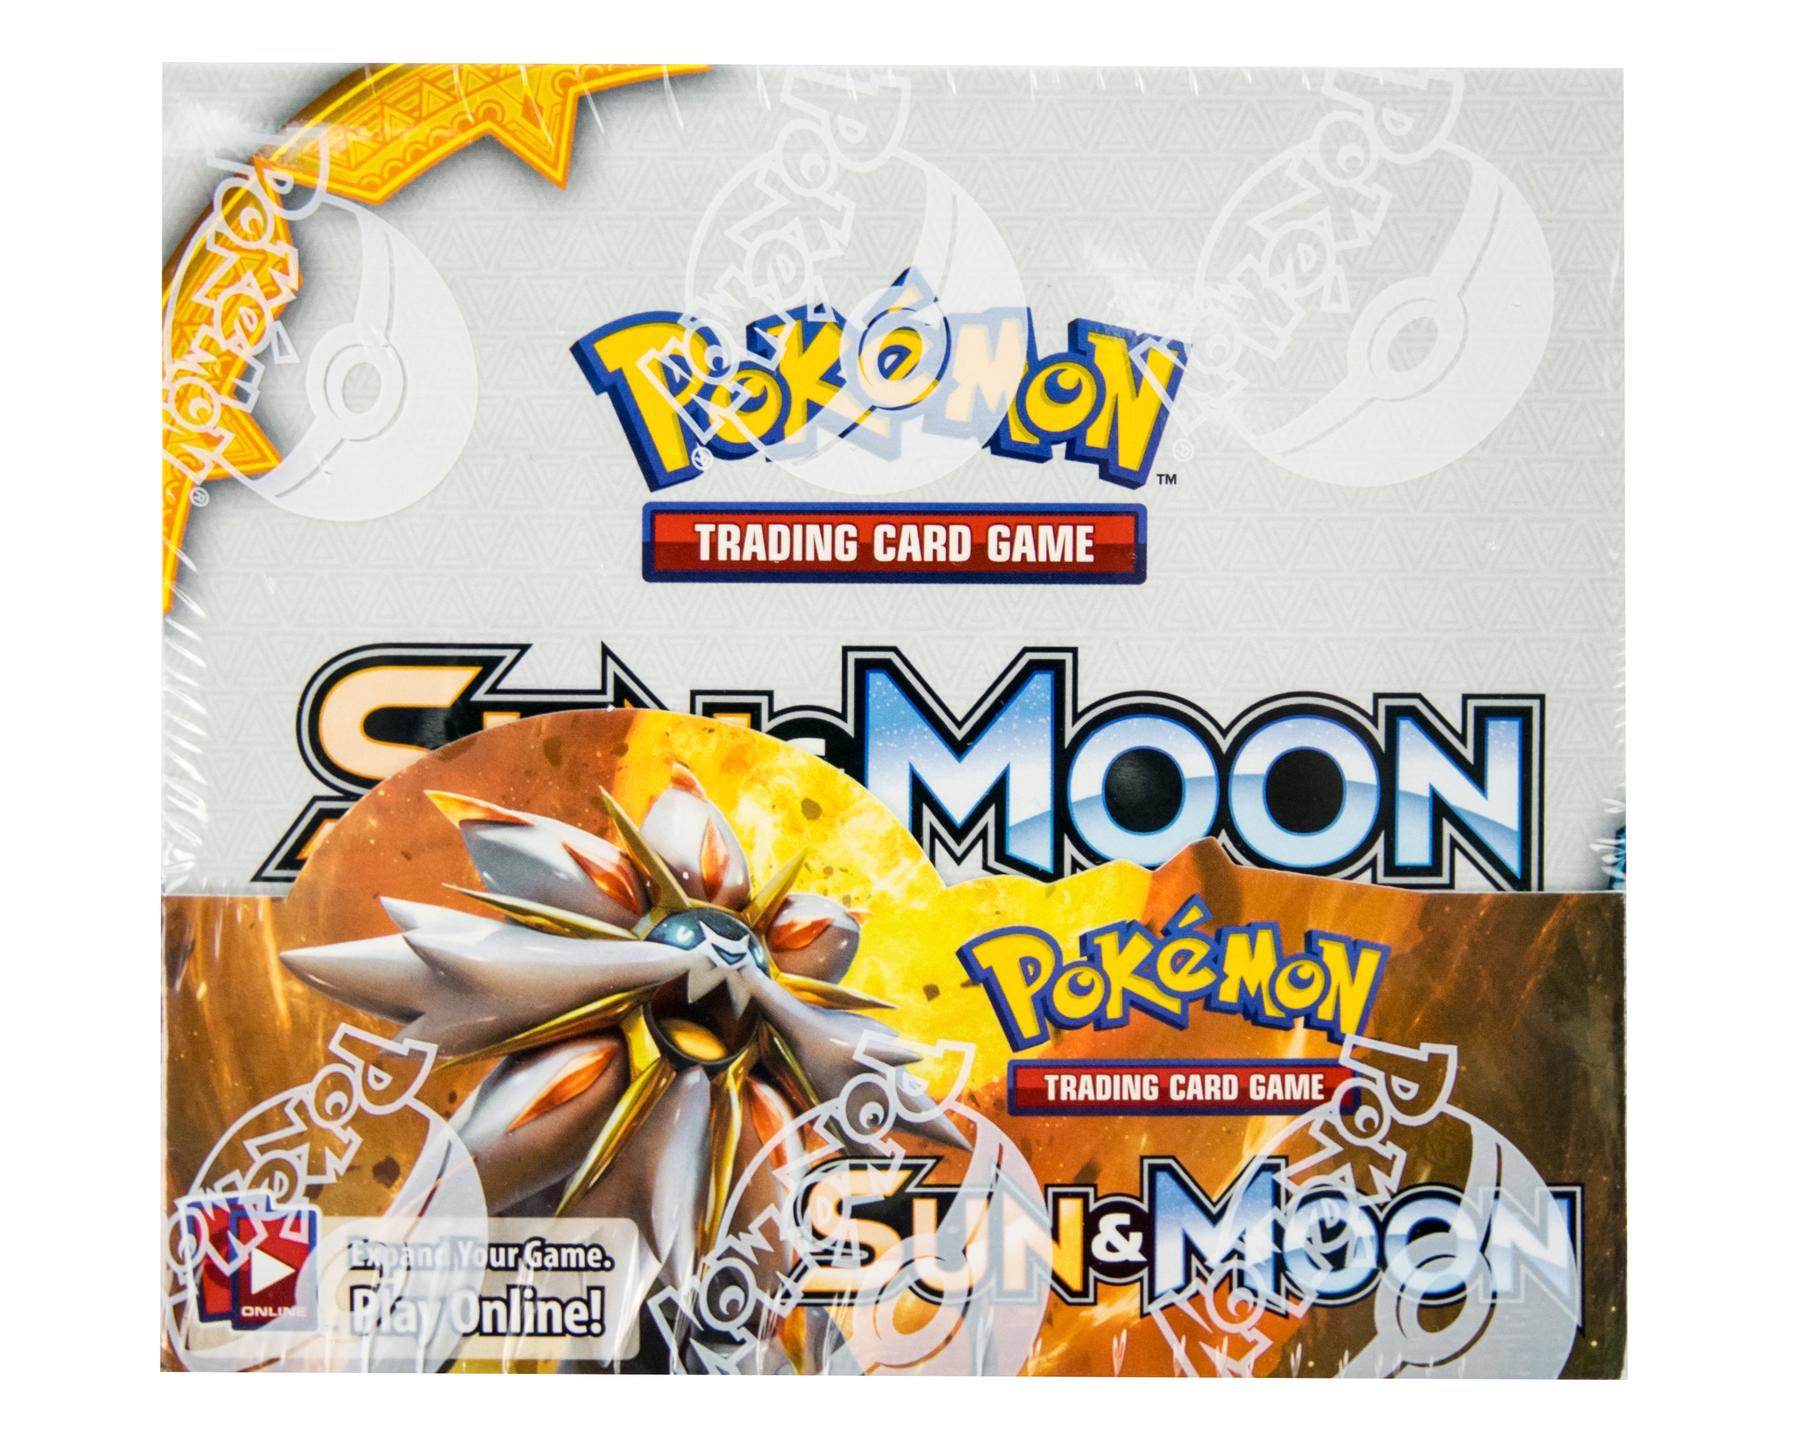 POKEMON SUN & AND MOON BOOSTER BOX FREE PRIORITY MAIL SHIPPING